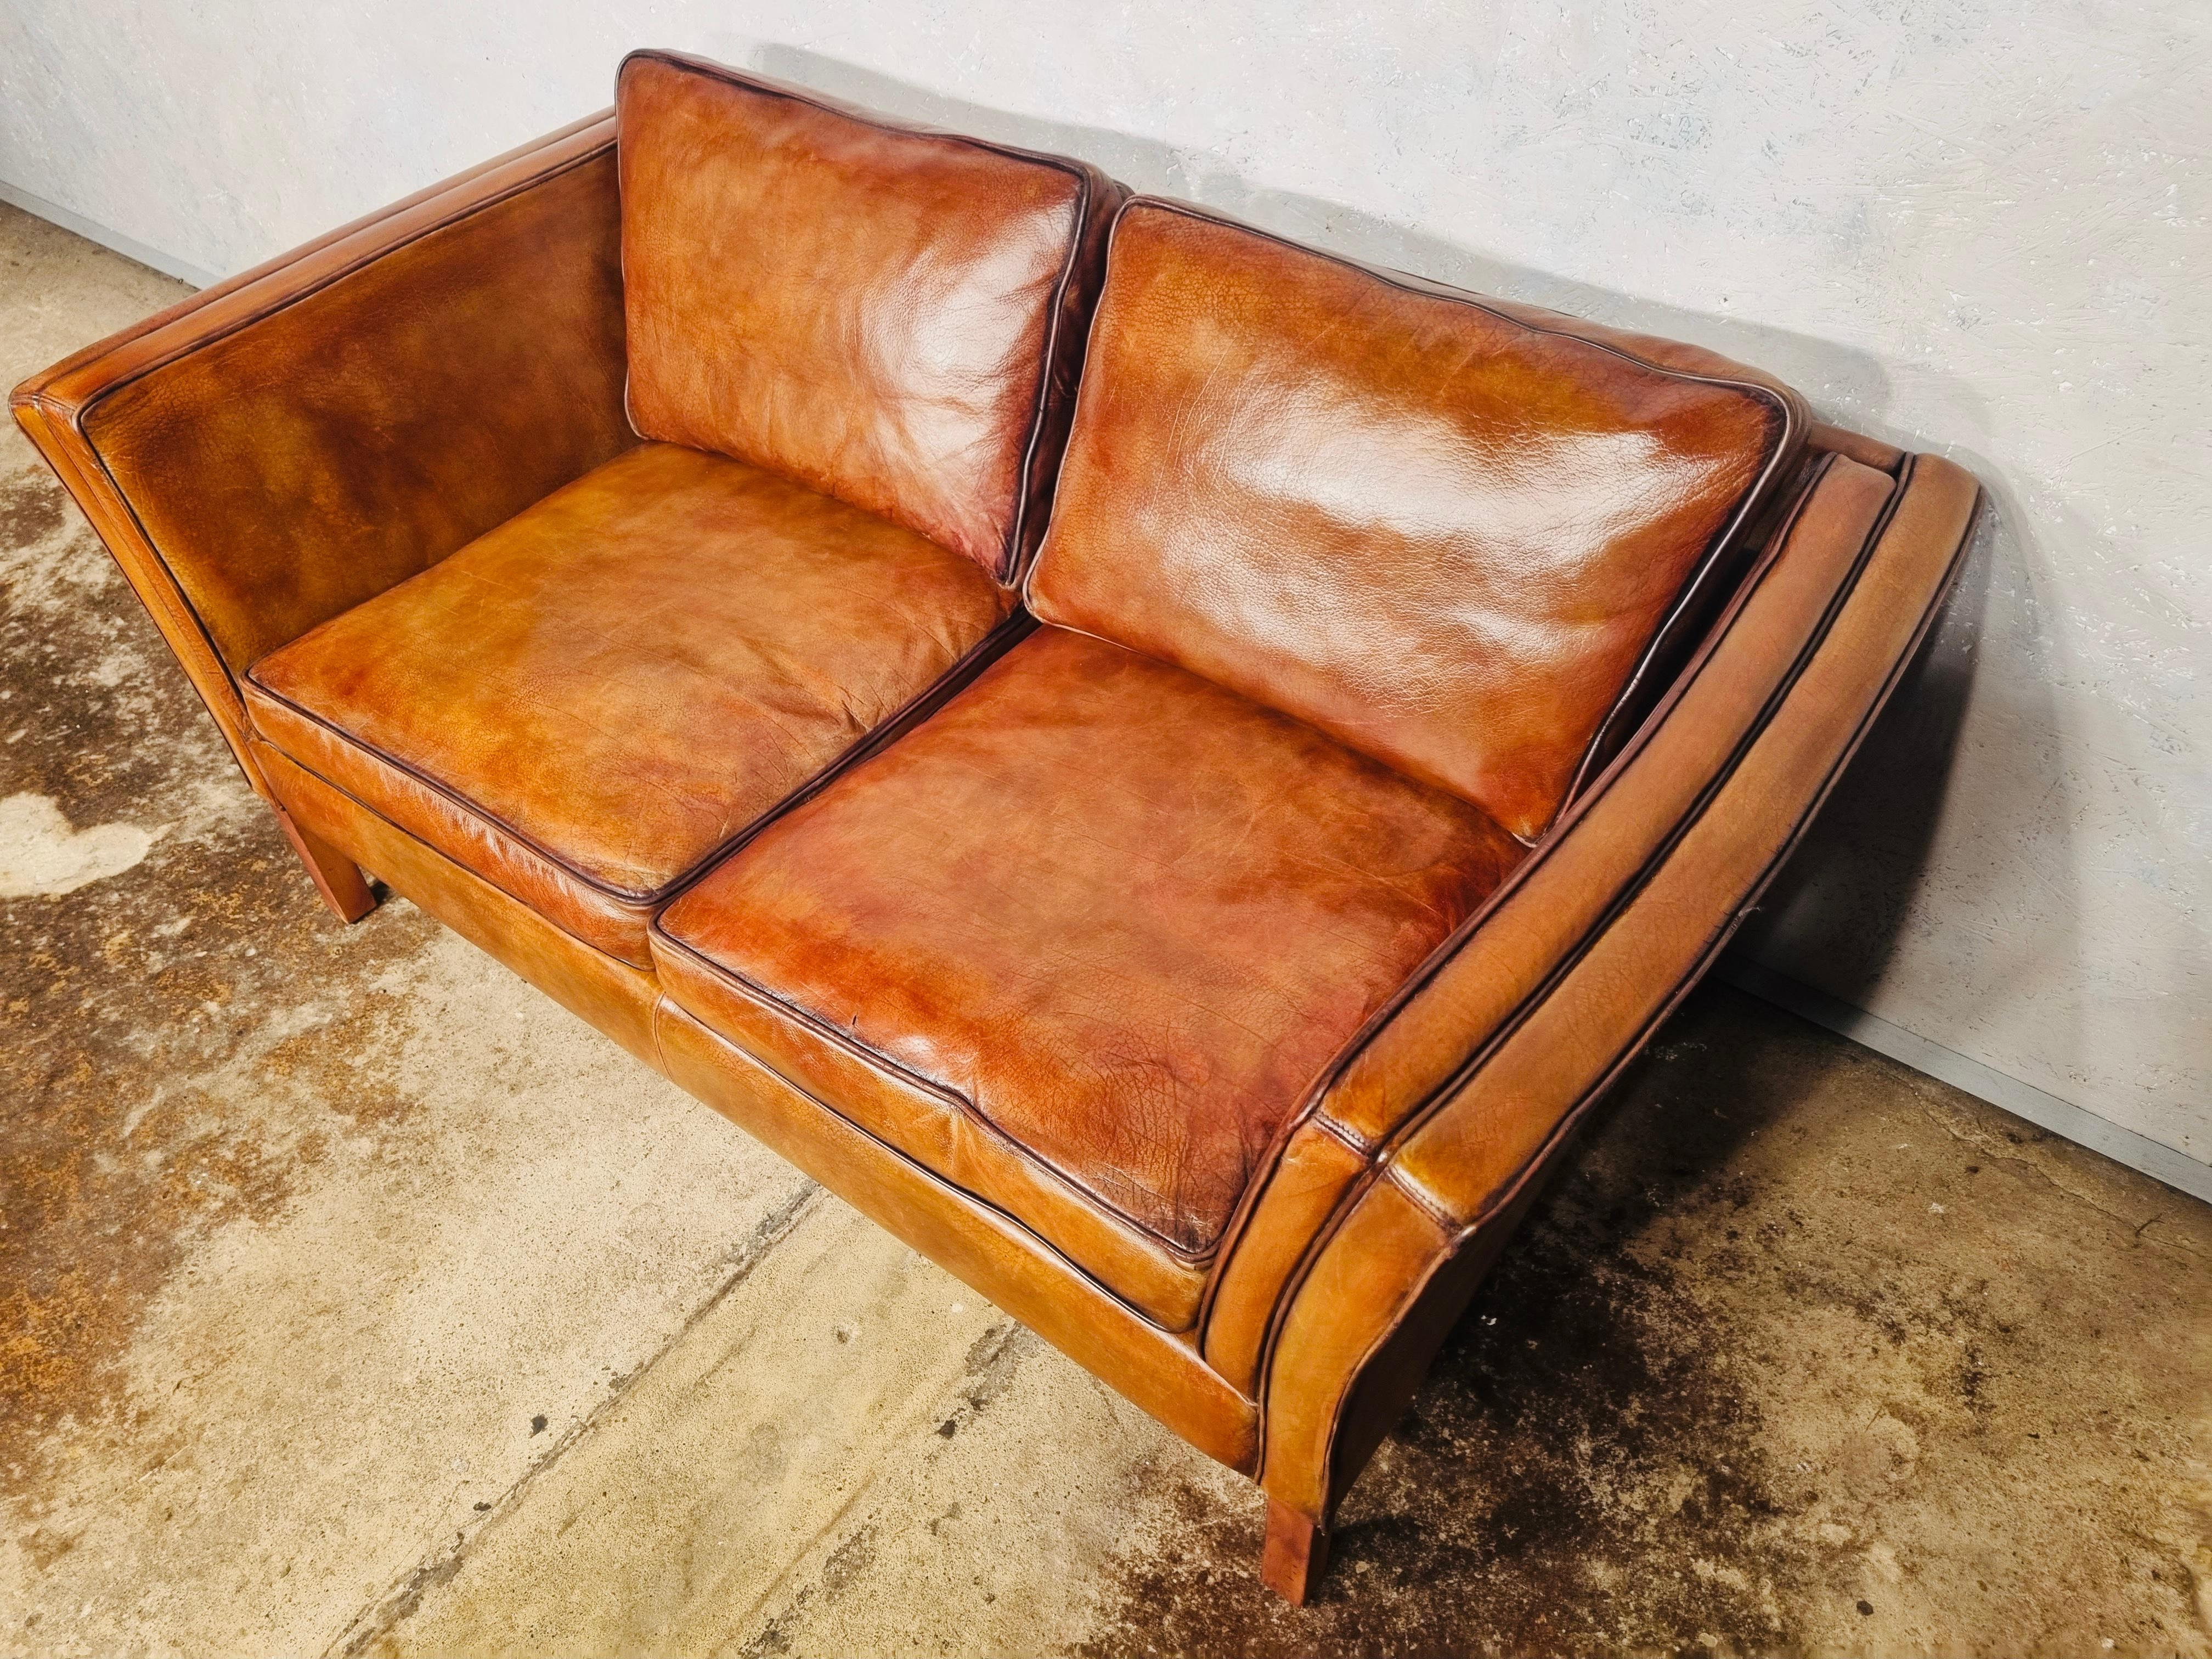 70s vintage couch